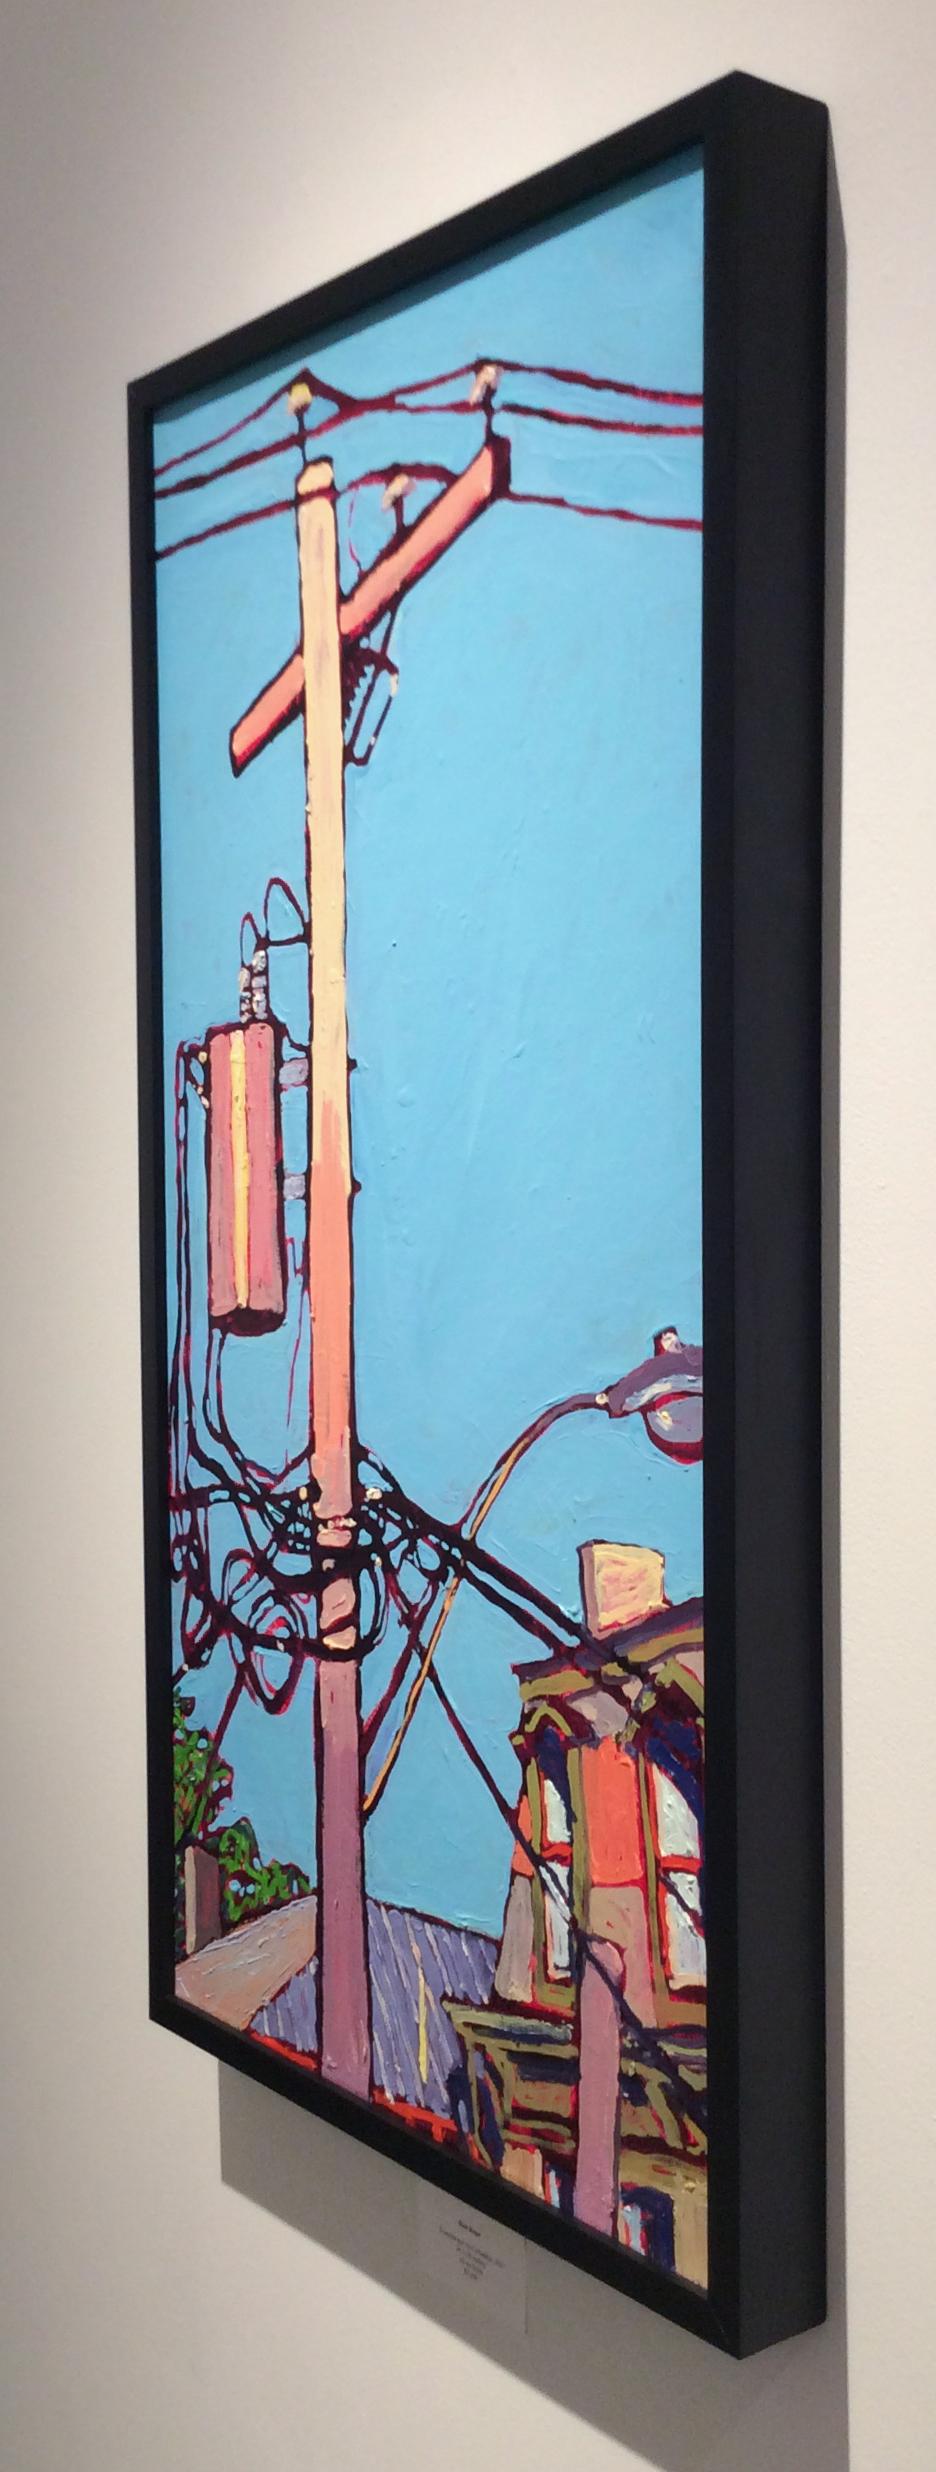 Modern, Fauvist style cityscape painting of a rooftop and electric pole against a bright blue sky
Oil on linen framed in a simple black frame, 36 x 18 inches
Signed on the back in red oil paint

This modern, Fauvist-style cityscape painting by Dan